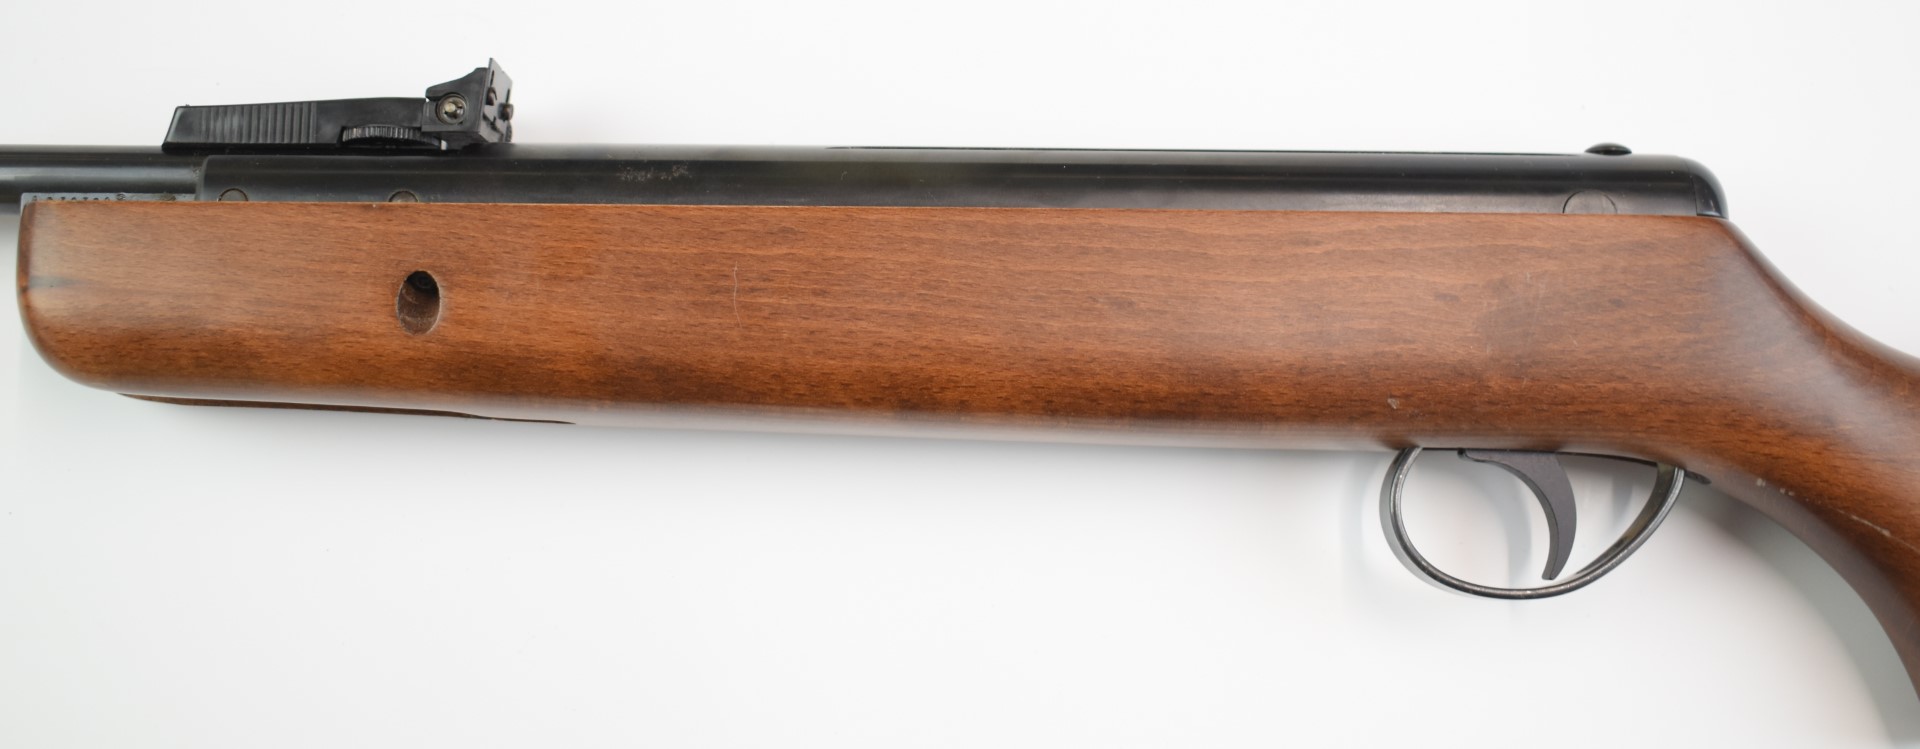 BSA Supersport .177 FAC air rifle with semi-pistol grip and adjustable sights, serial number - Image 16 of 20